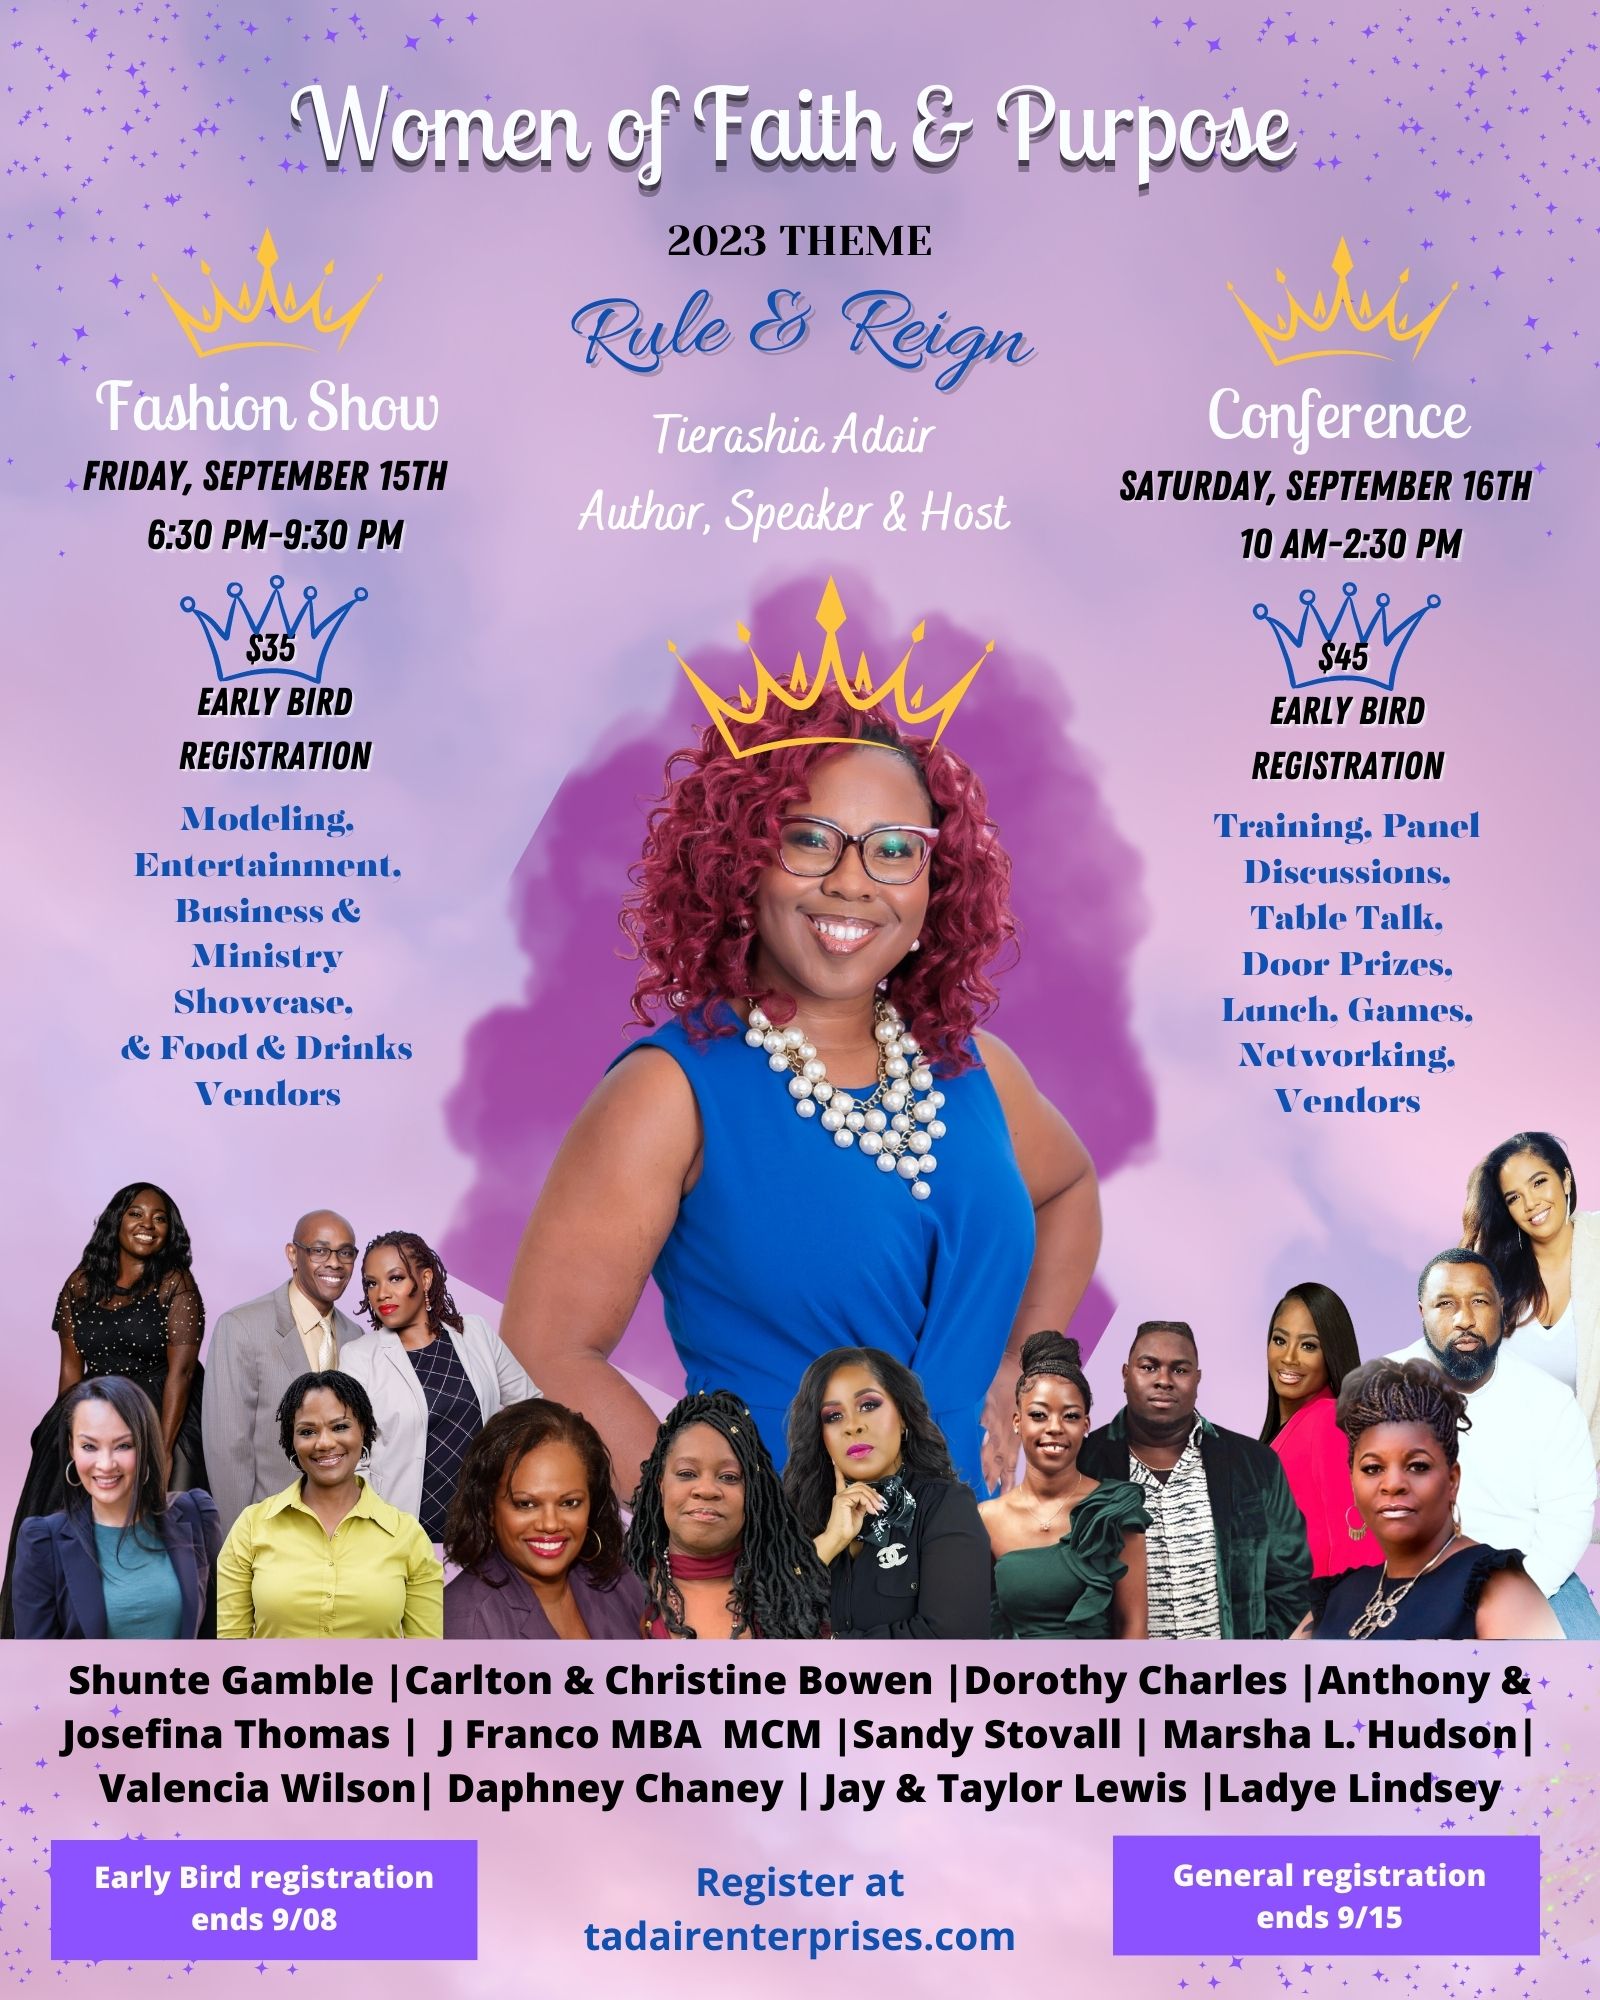 Women of Faith & Purpose "Rule and Reign" Fashion Show (Friday) and Conference (Saturday).